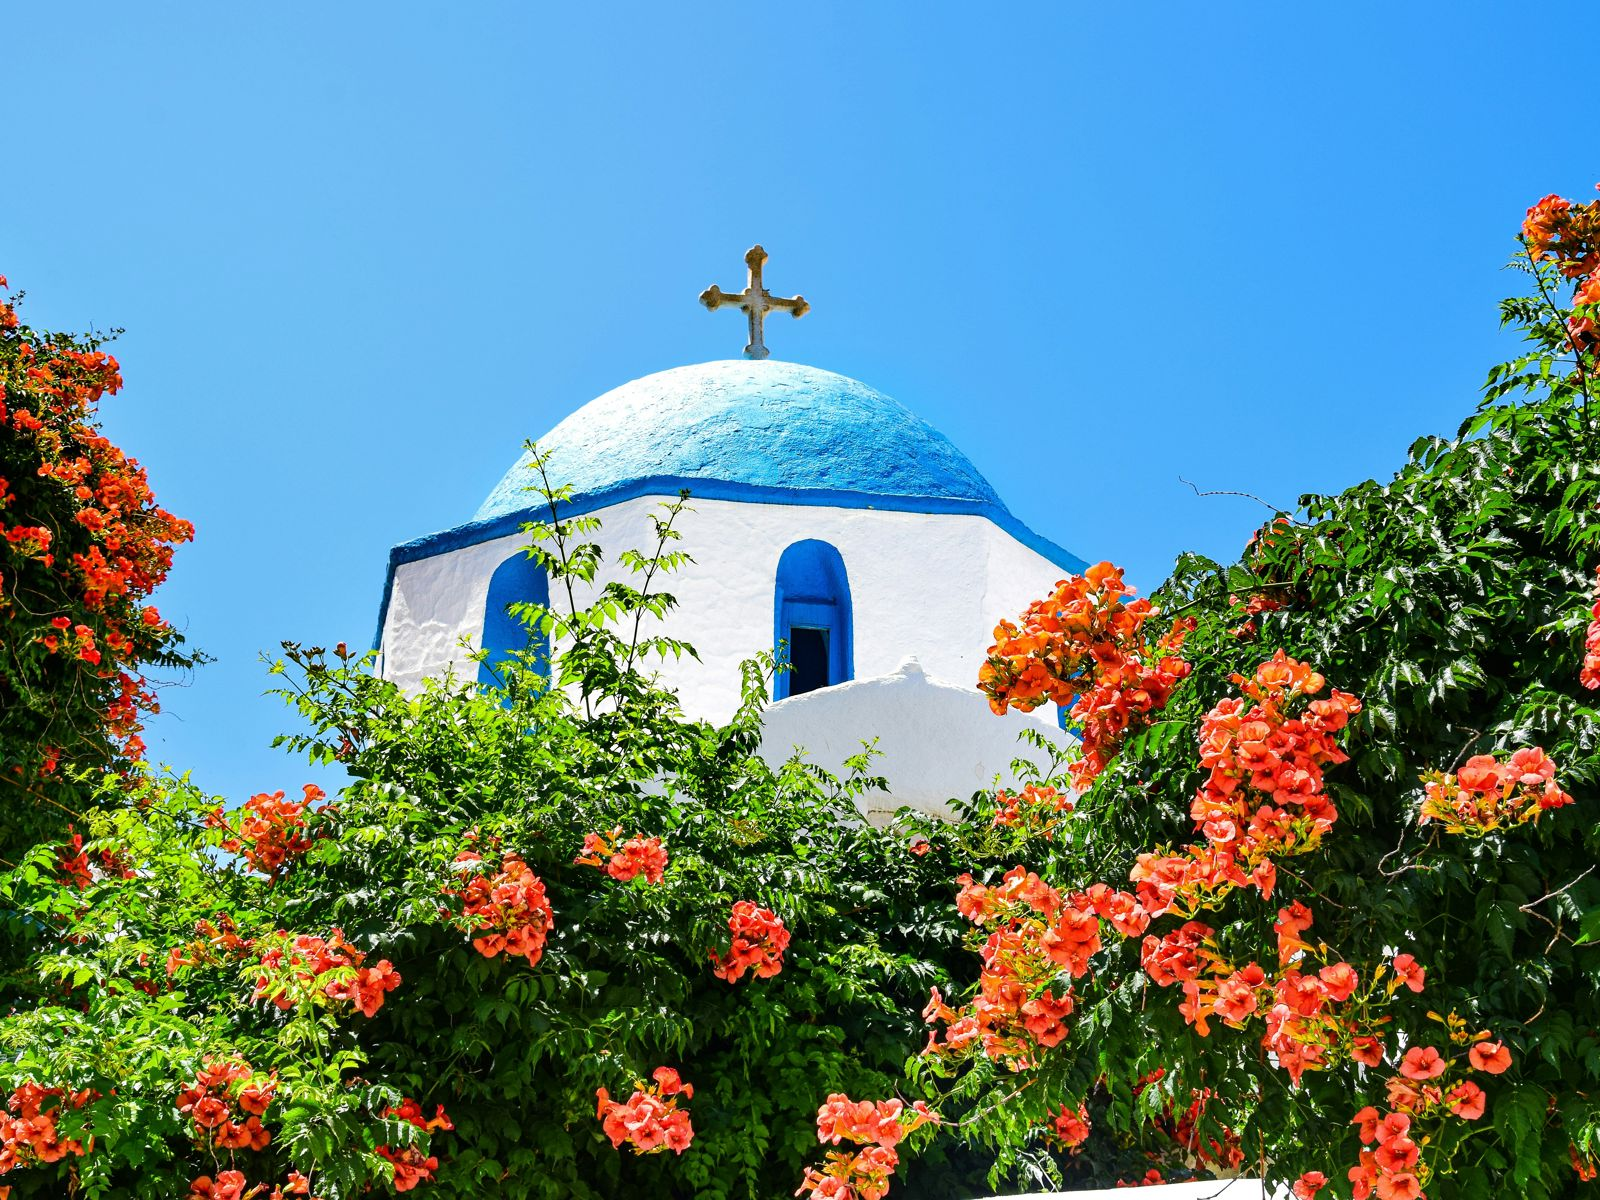 Greek church tower with blue roof surrounded by greenery and beautiful flowers